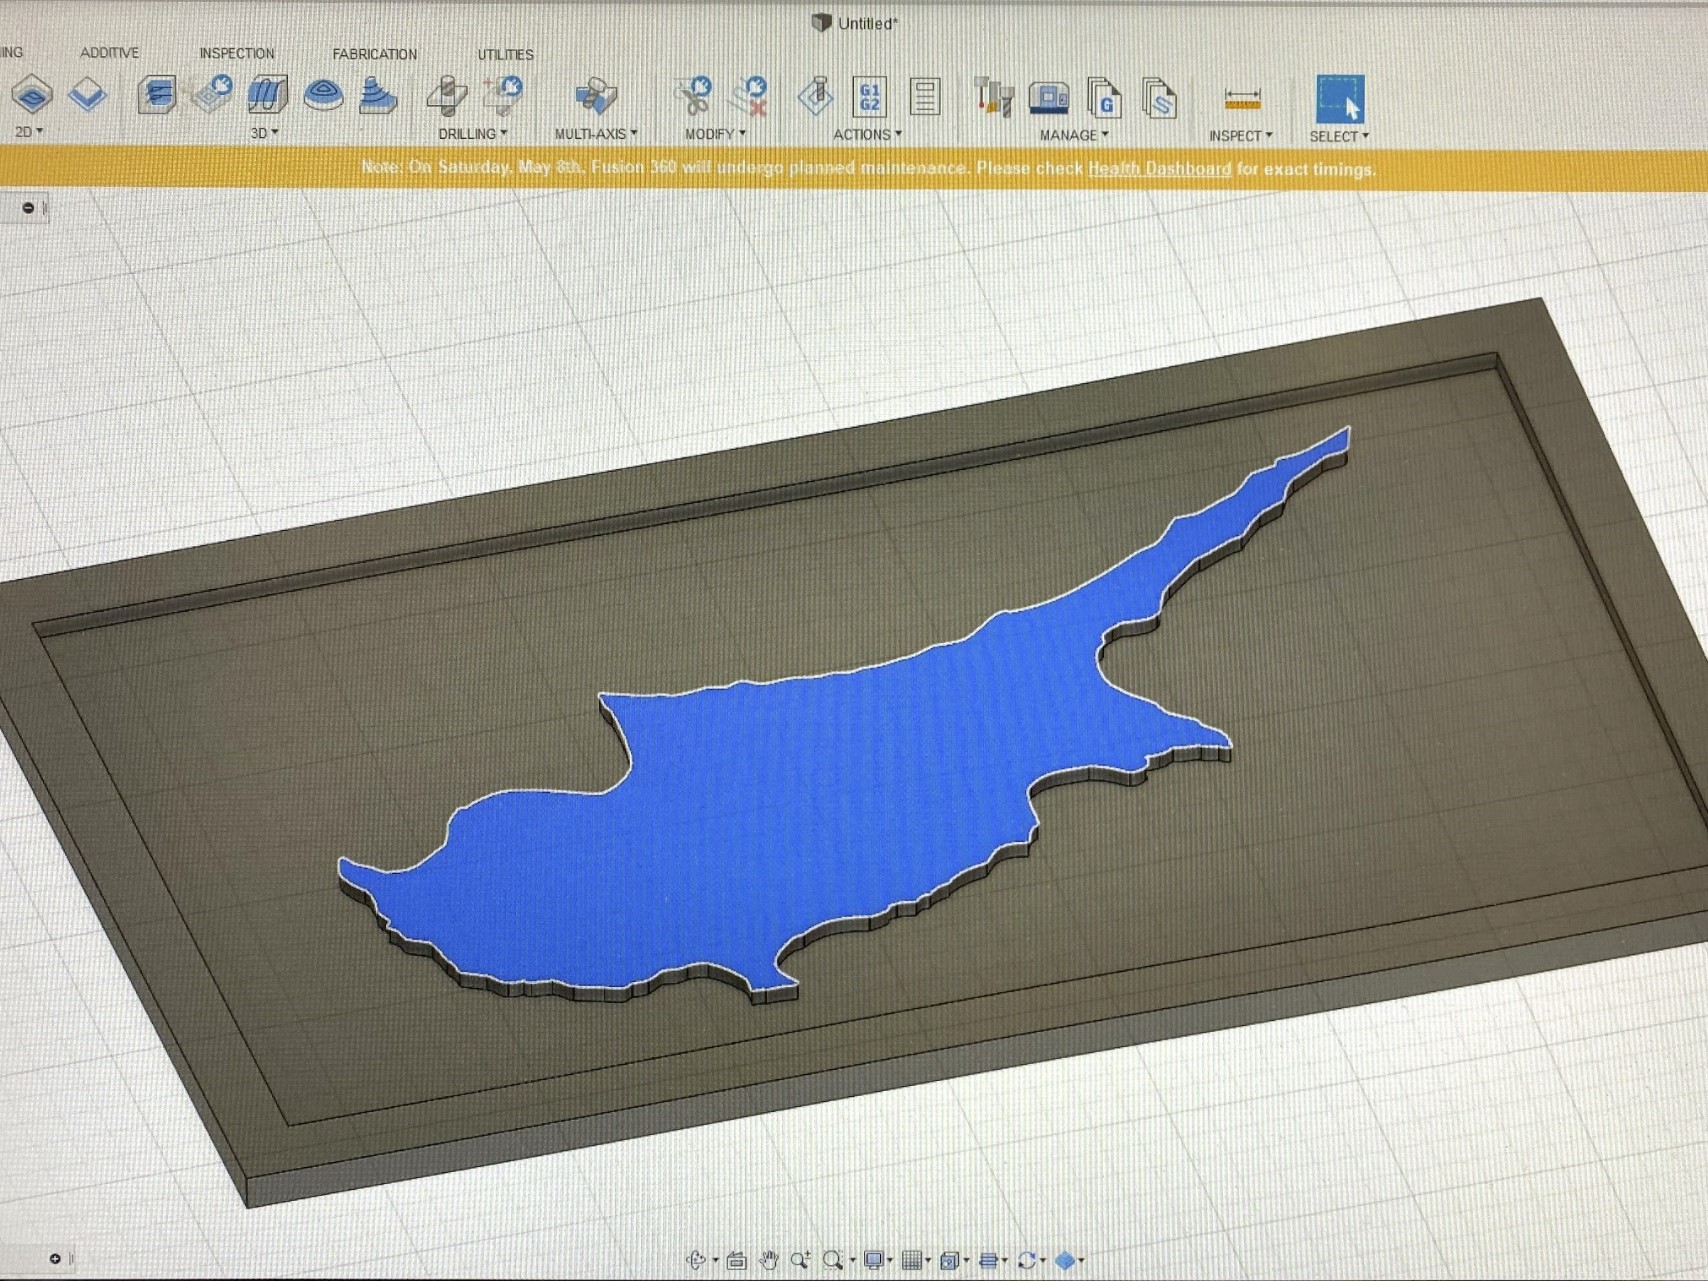 3D model of Cyprus on a computer screen